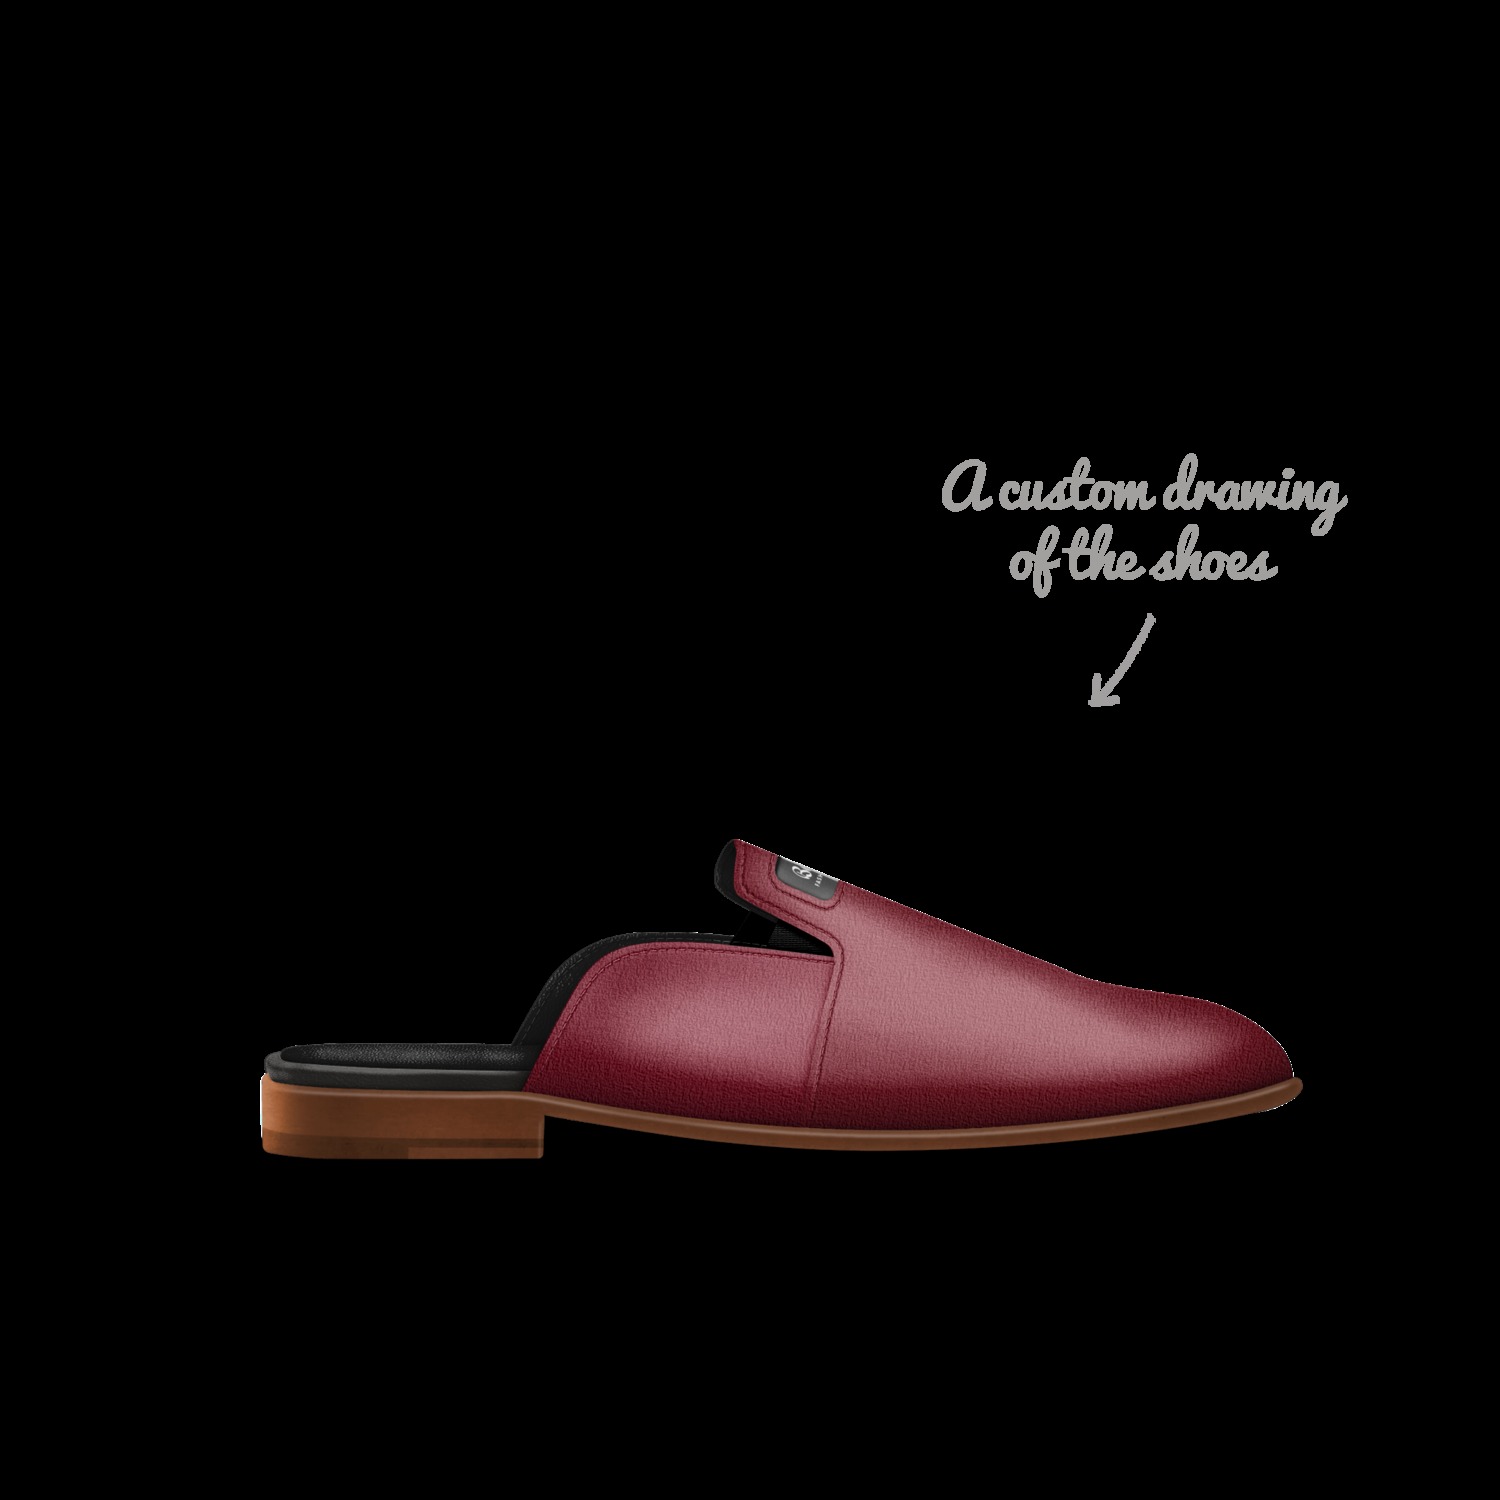 A Custom Shoe concept by Yvette Taylor